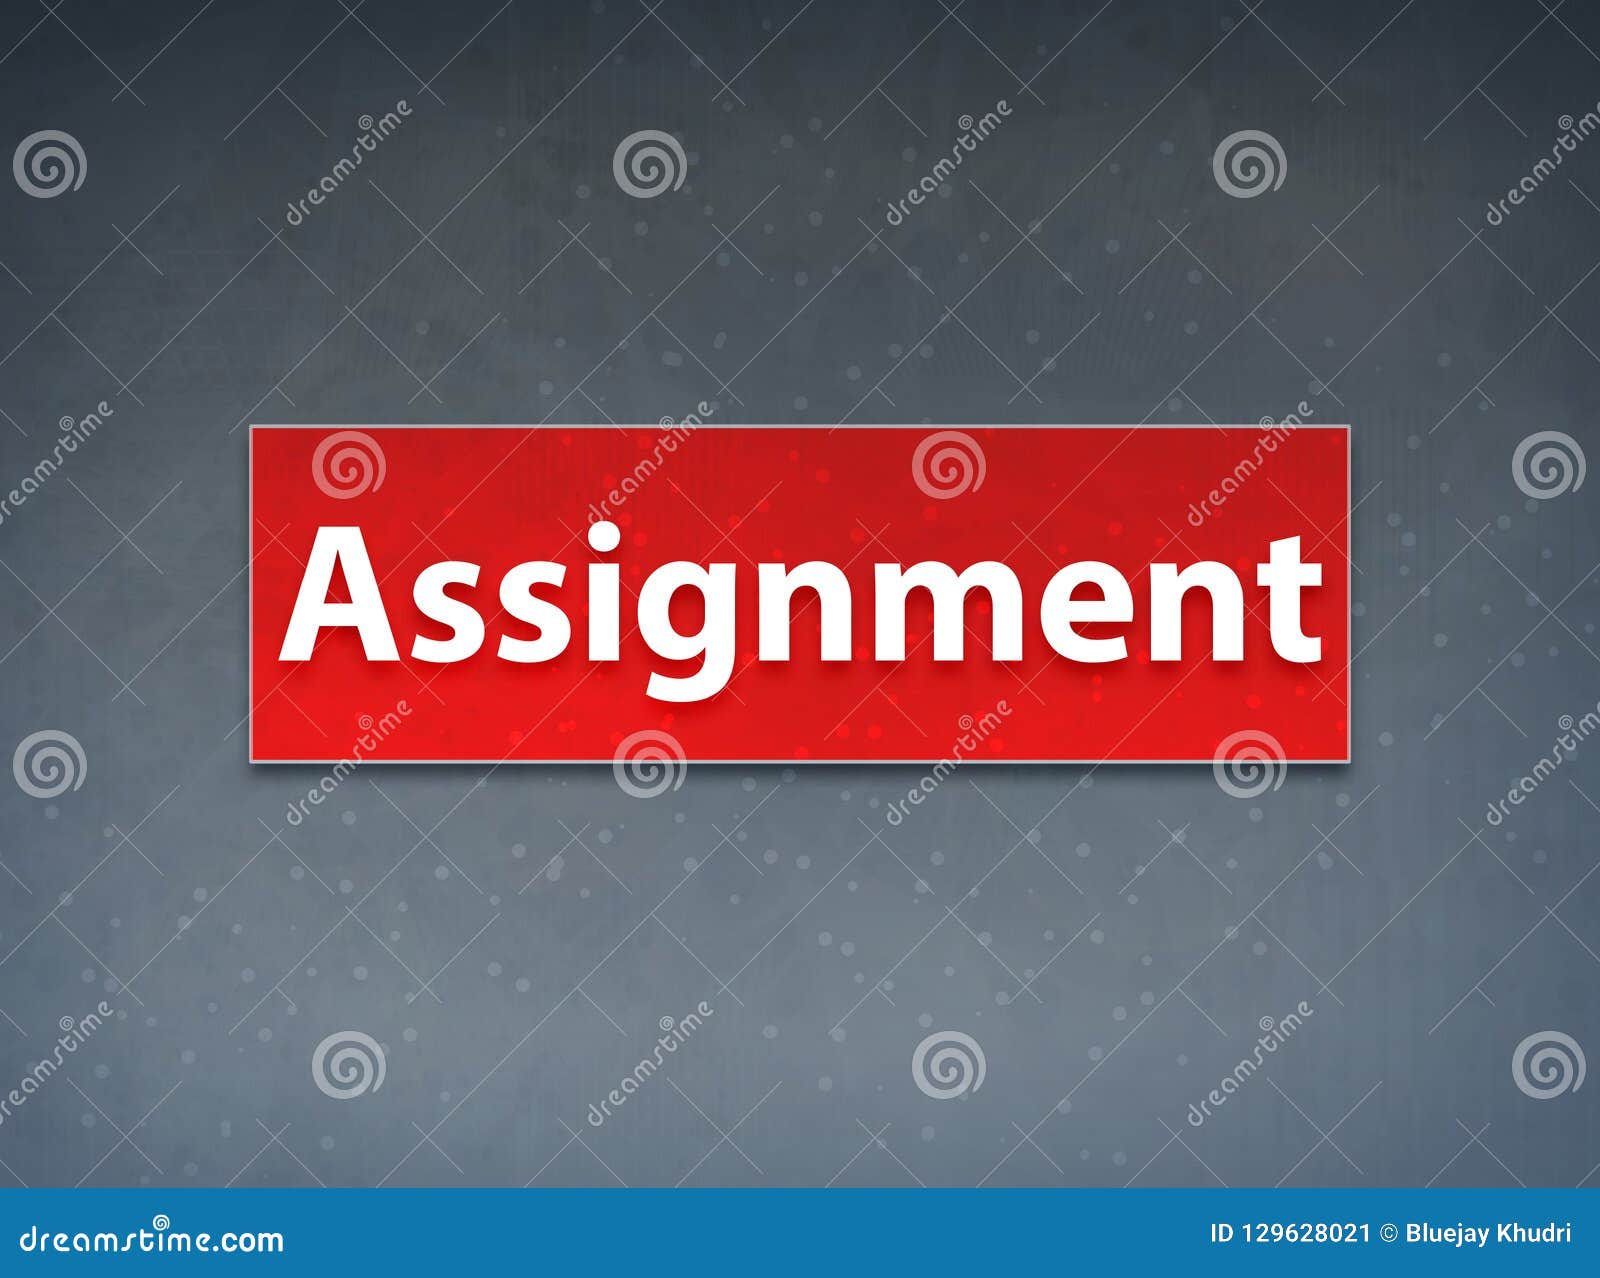 Assignment Red Banner Abstract Background Stock Illustration - Illustration  of commission, assignment: 129628021